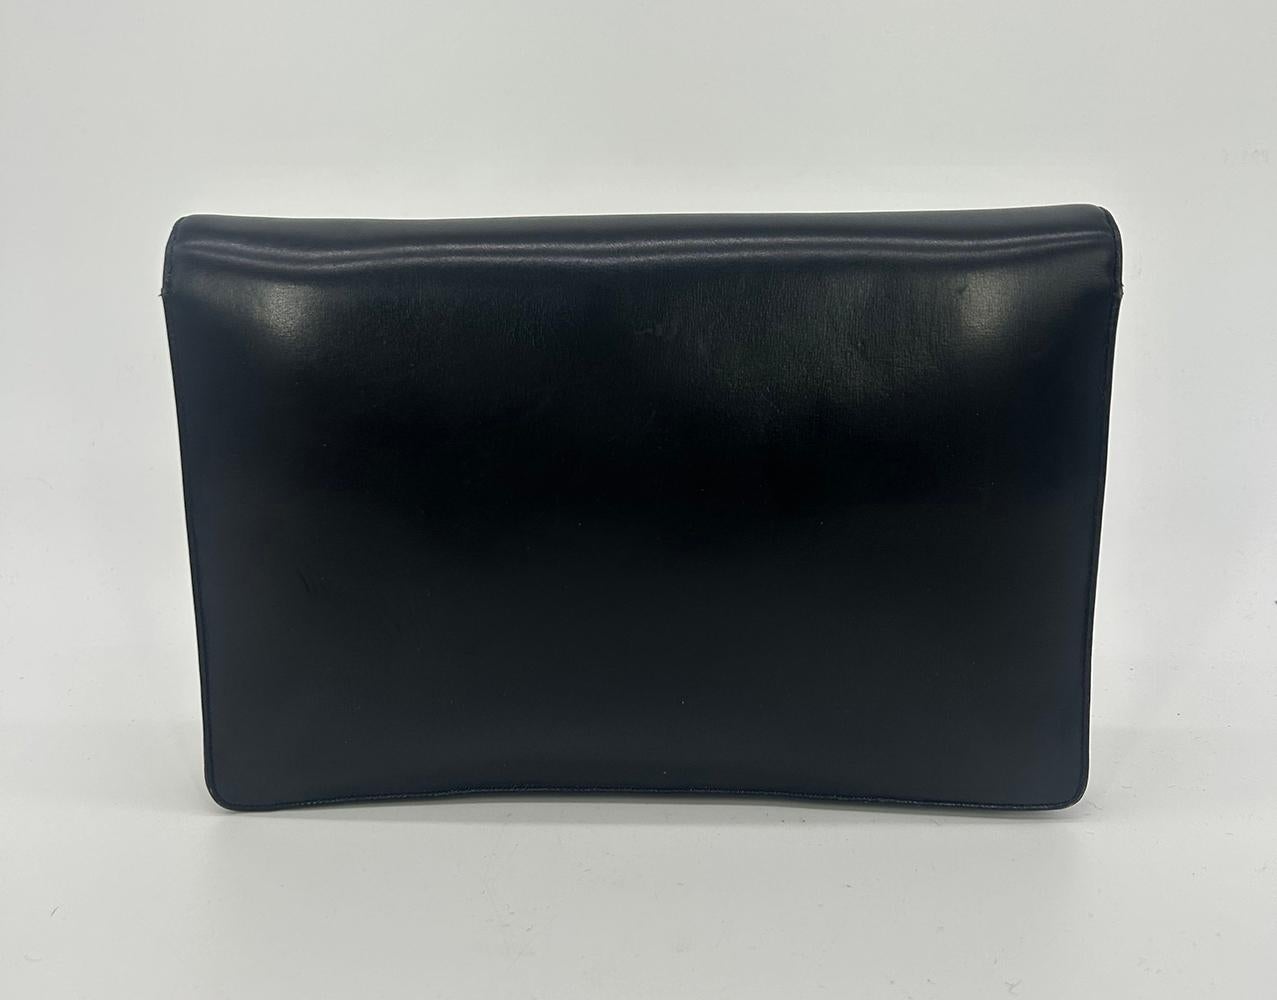 Vintage Judith Leiber Black Box Calf Leather Clutch in good condition. Smooth black box calf leather exterior trimmed with gold hardware and unique round orange resin detail along top front flap. Snap flap closure opens double flap style to a gold